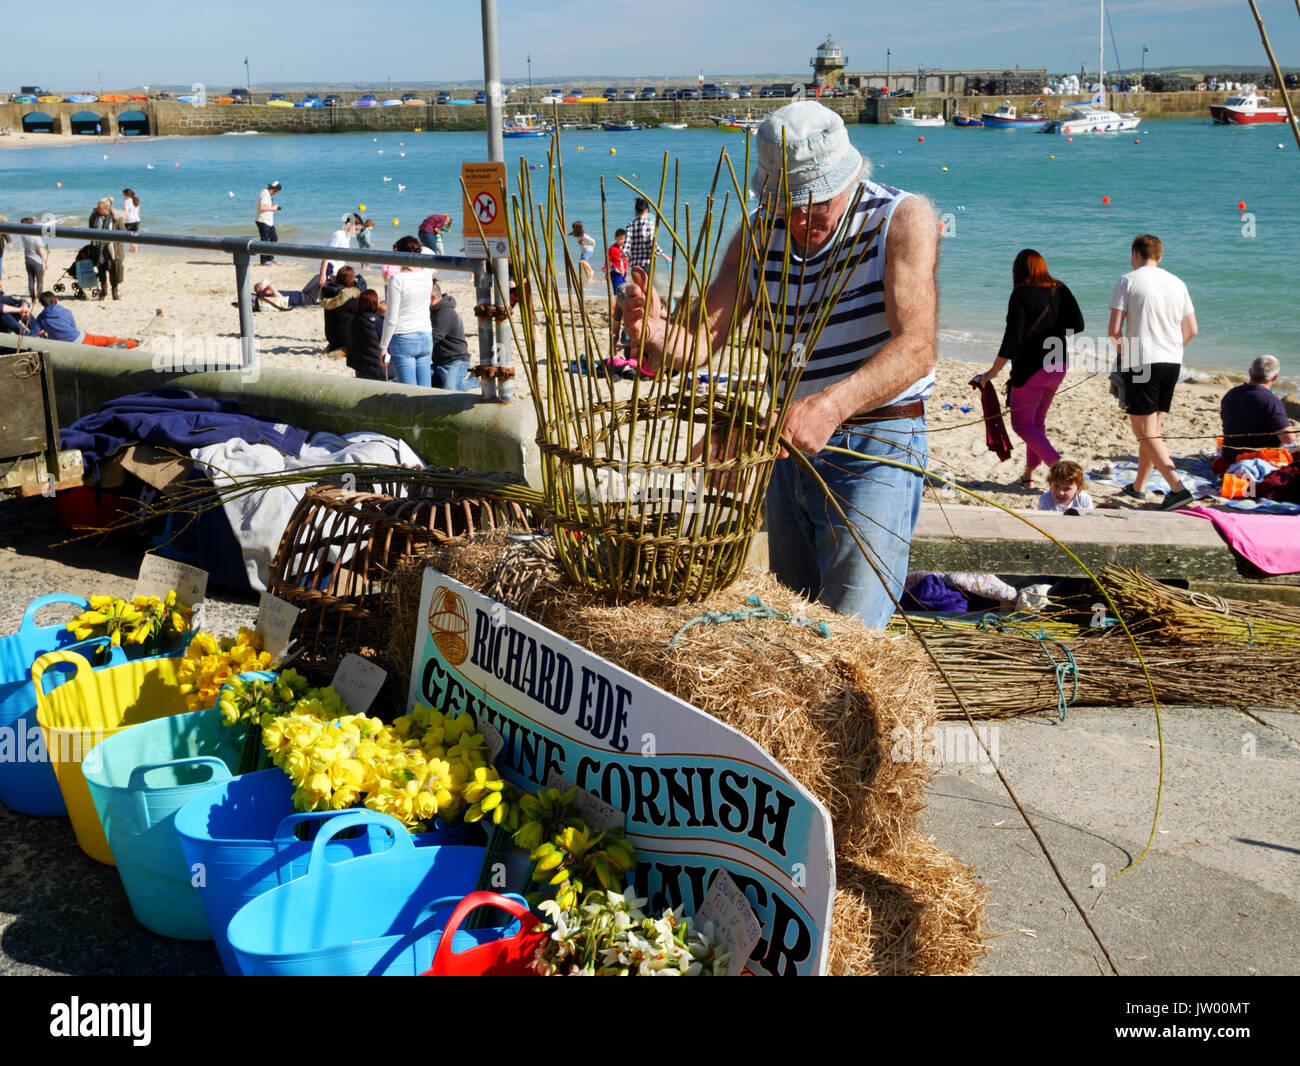 Cornish withy crab pot maker Richard Ede demonstrating his craft at St Ives, 25th March 2017. Stock Photo